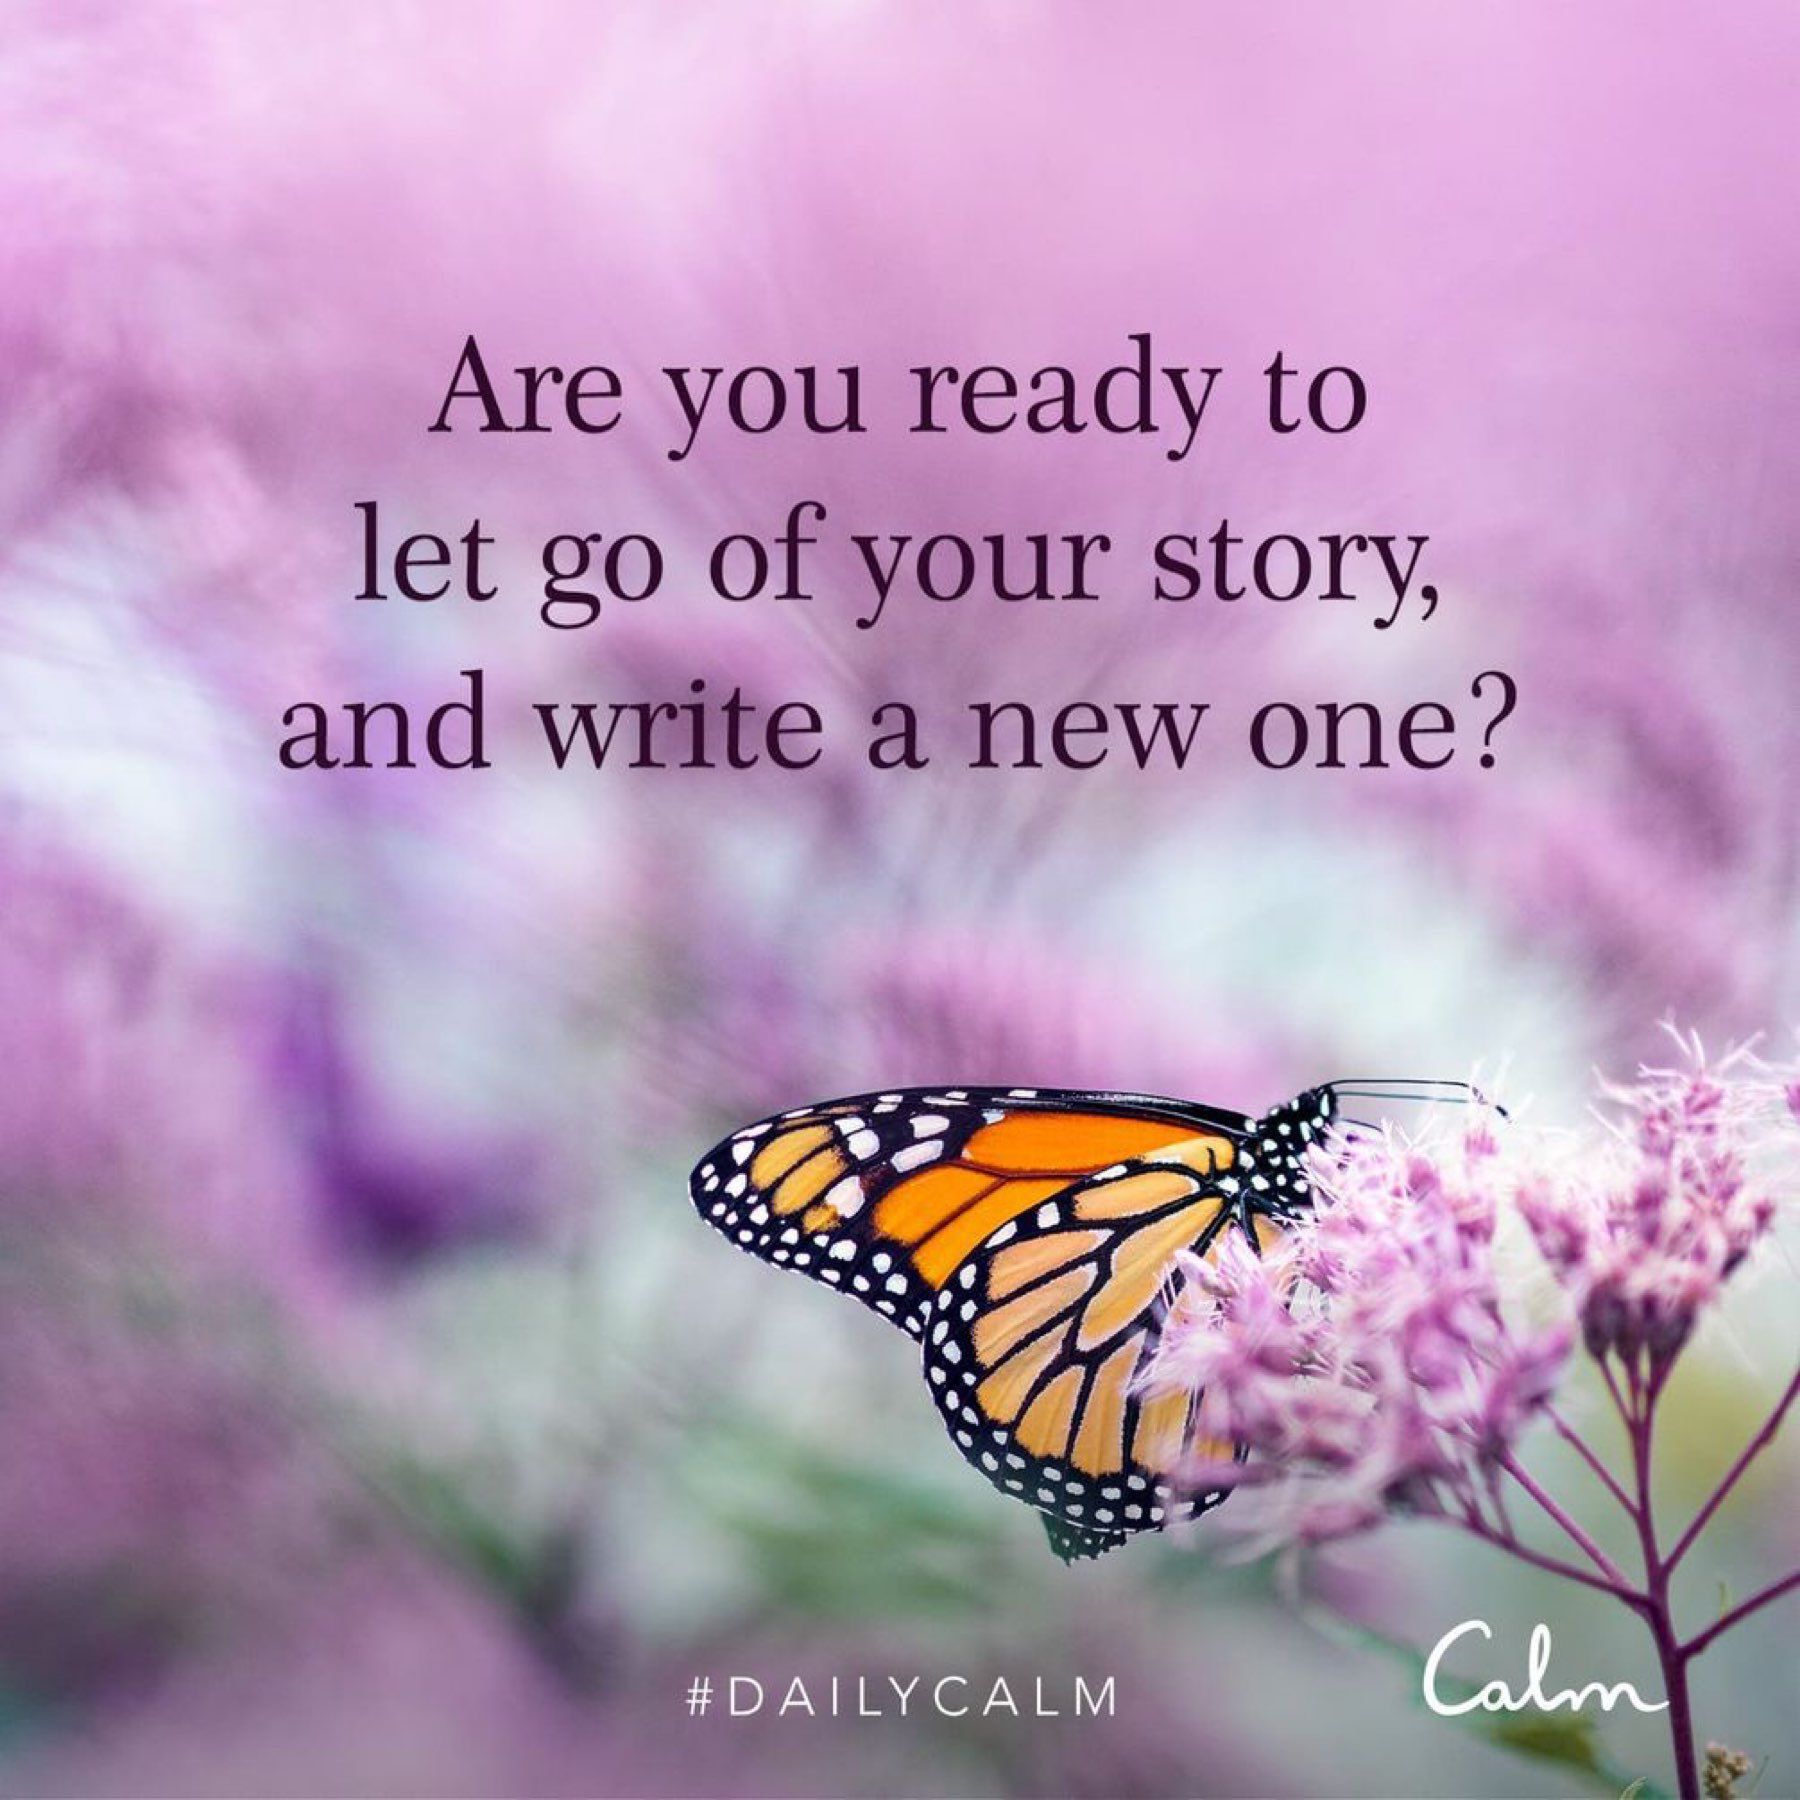 Are you ready to let go of your story and write a new one?